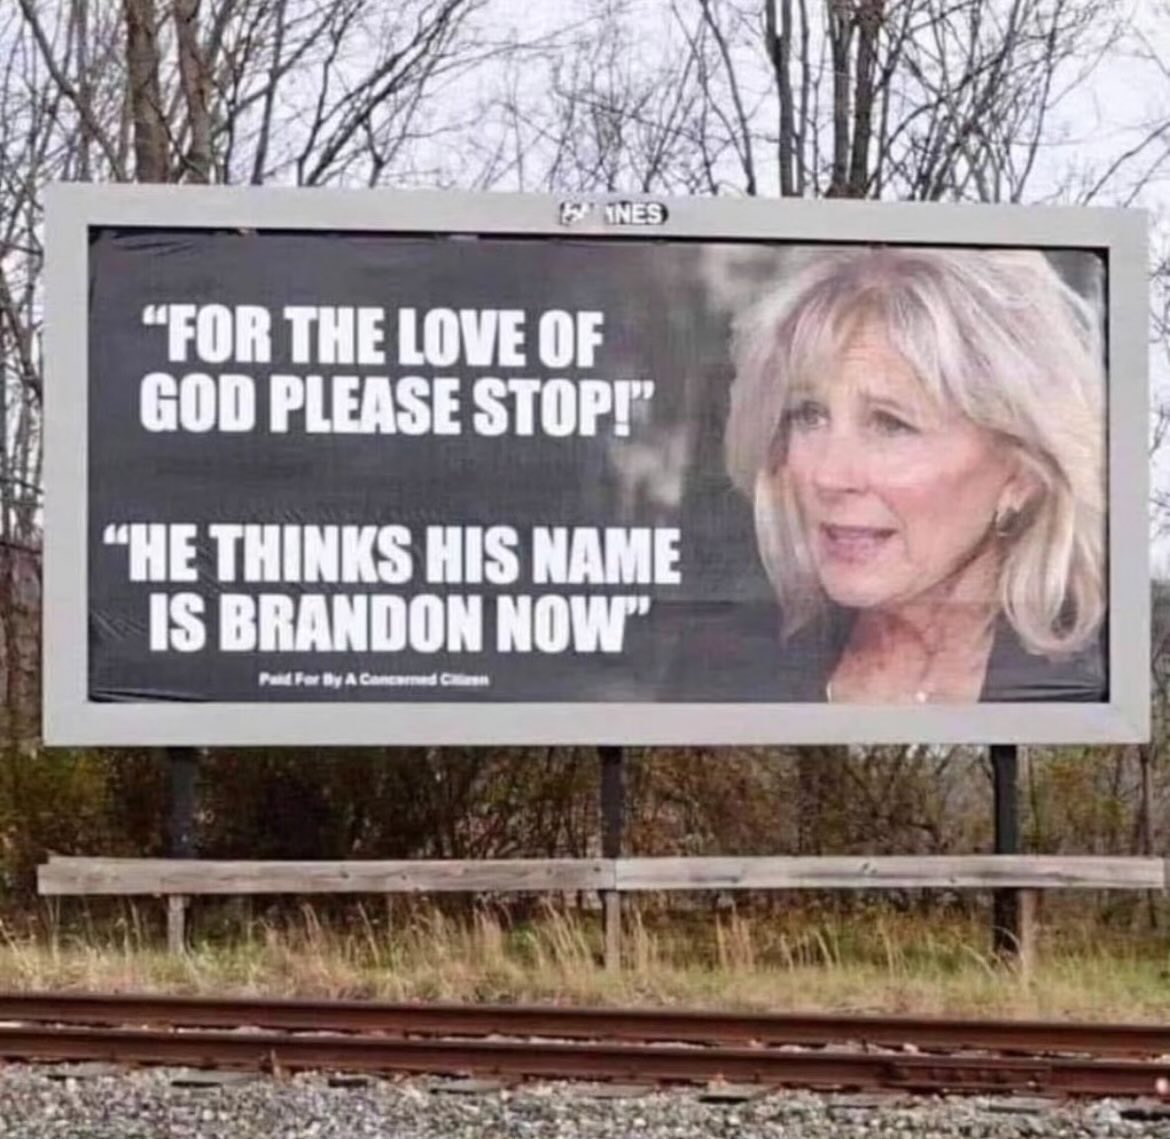 This is an actual real billboard in Ohio 😂🤣